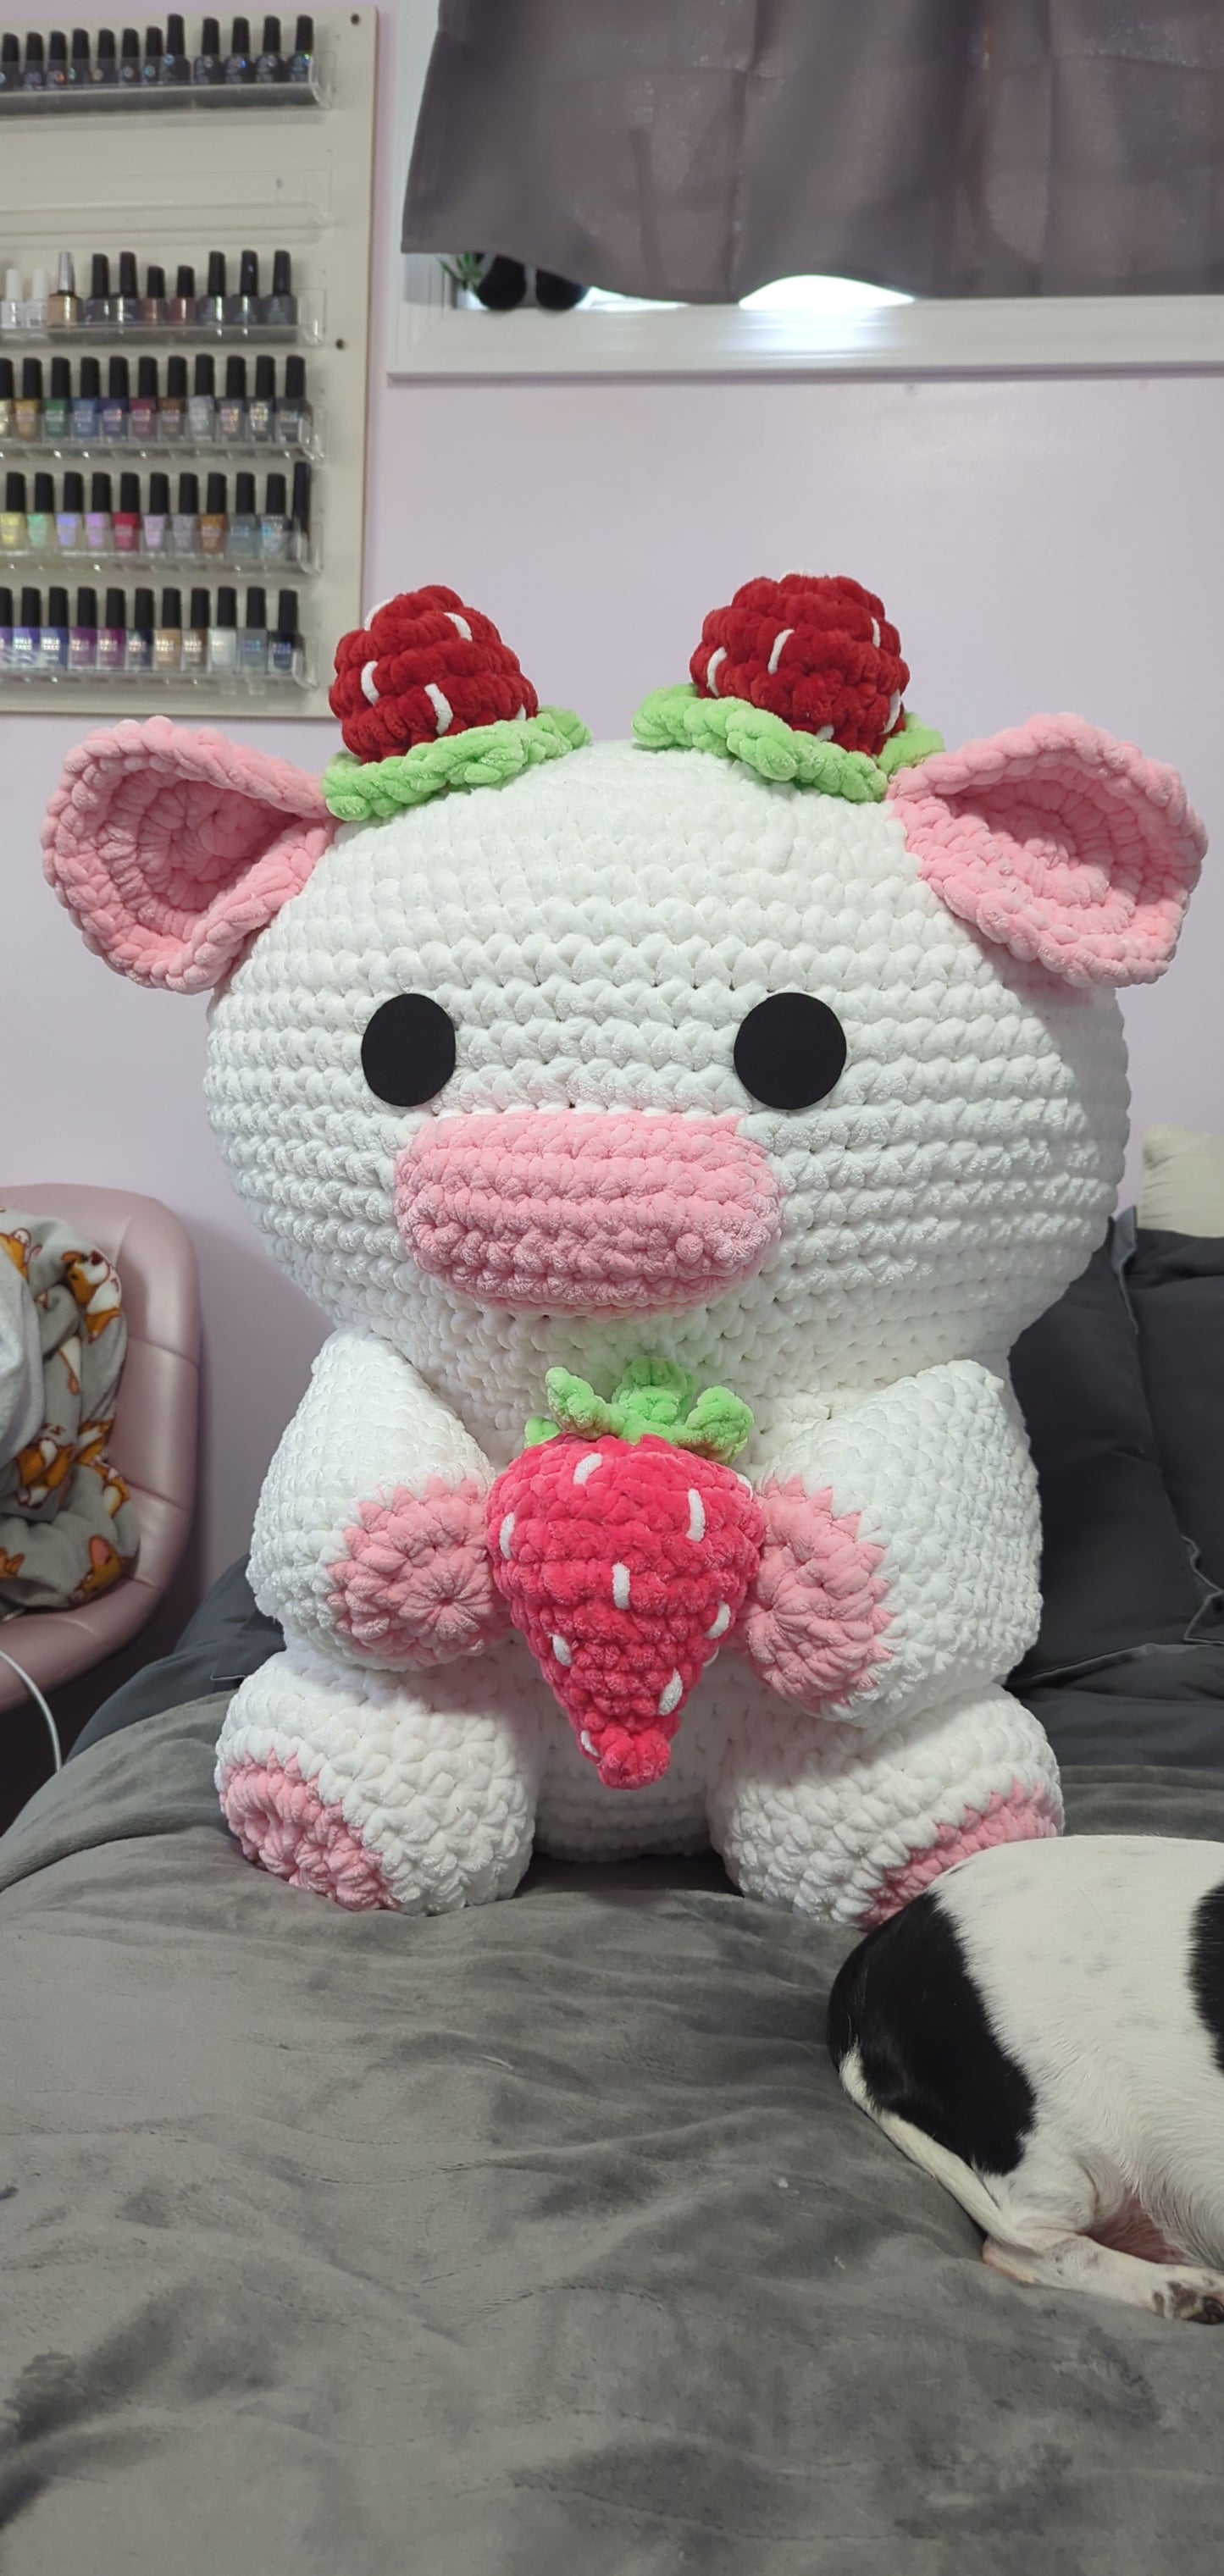 Giant Strawberry Cow Crochet Pattern // NOT A PHYSICAL ITEM